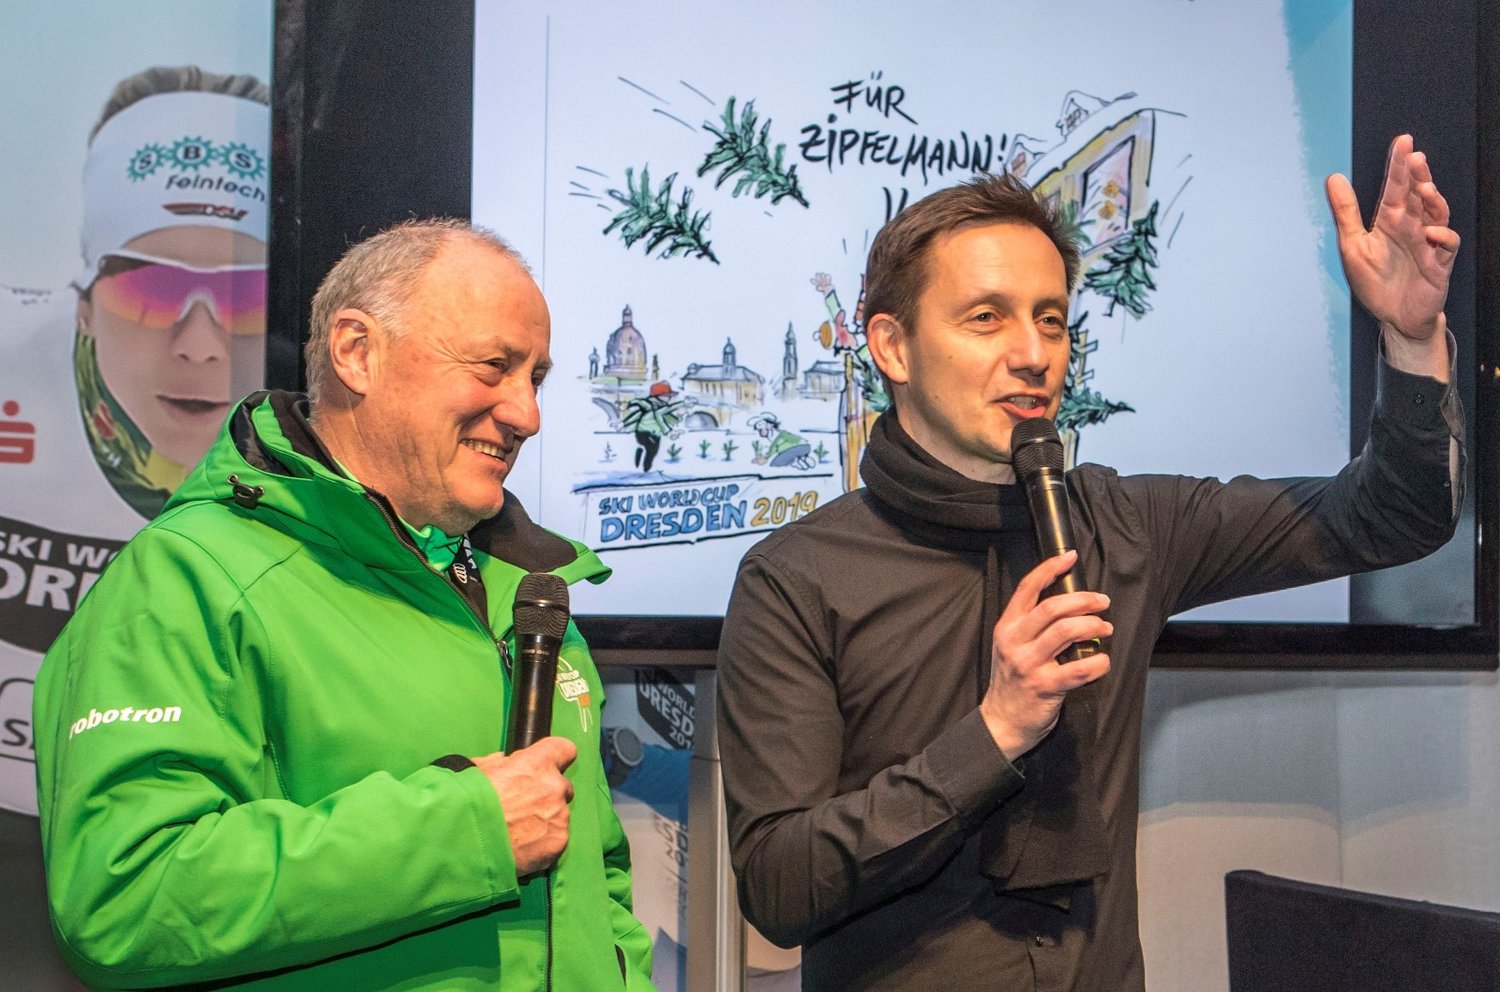 Dresden World Cup Chief of Competition Georg Zipfel (L) and Co-Director Torsten Püschel talk about the event.